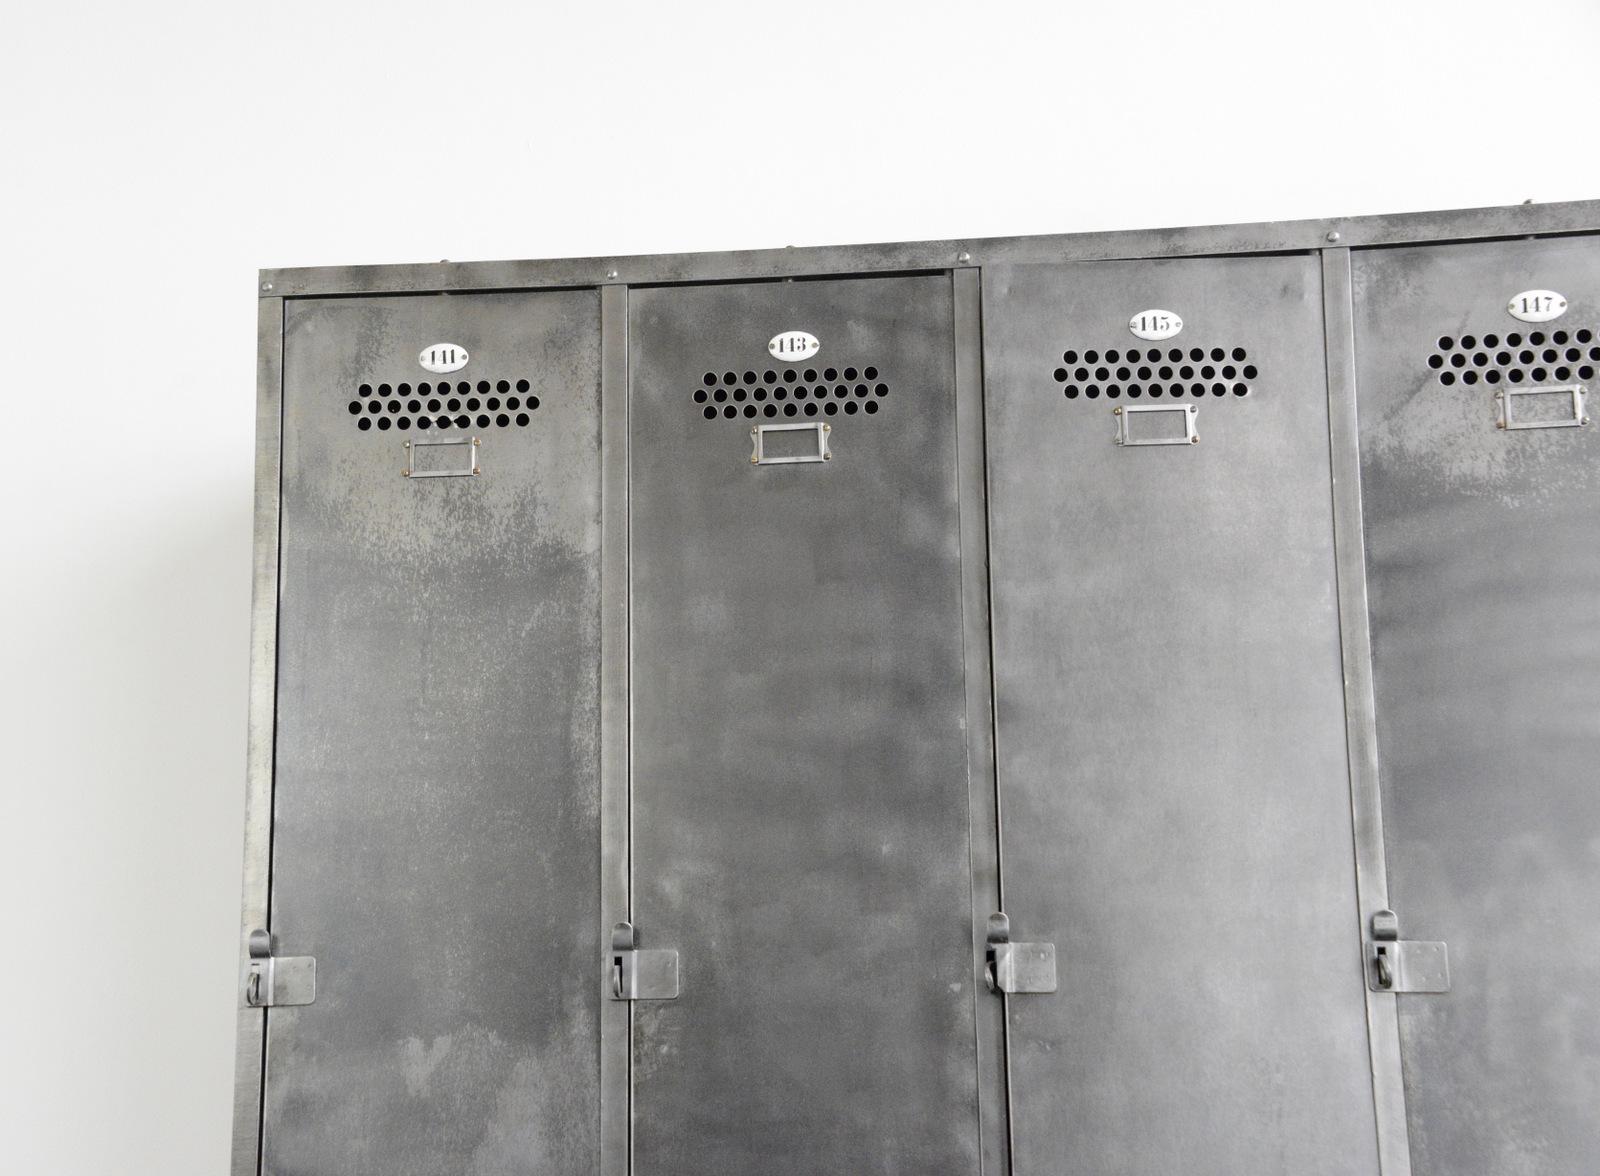 Industrial Lockers by Otto Bruckner circa 1930s

- Vented steel doors
- 4 compartments with hanging space and shelves
- Slide in doors
- Porcelain door numbers
- Made by Otto Bruckner, Chemnitz
- German ~ 1930s
- Measures: 183cm tall x 143cm